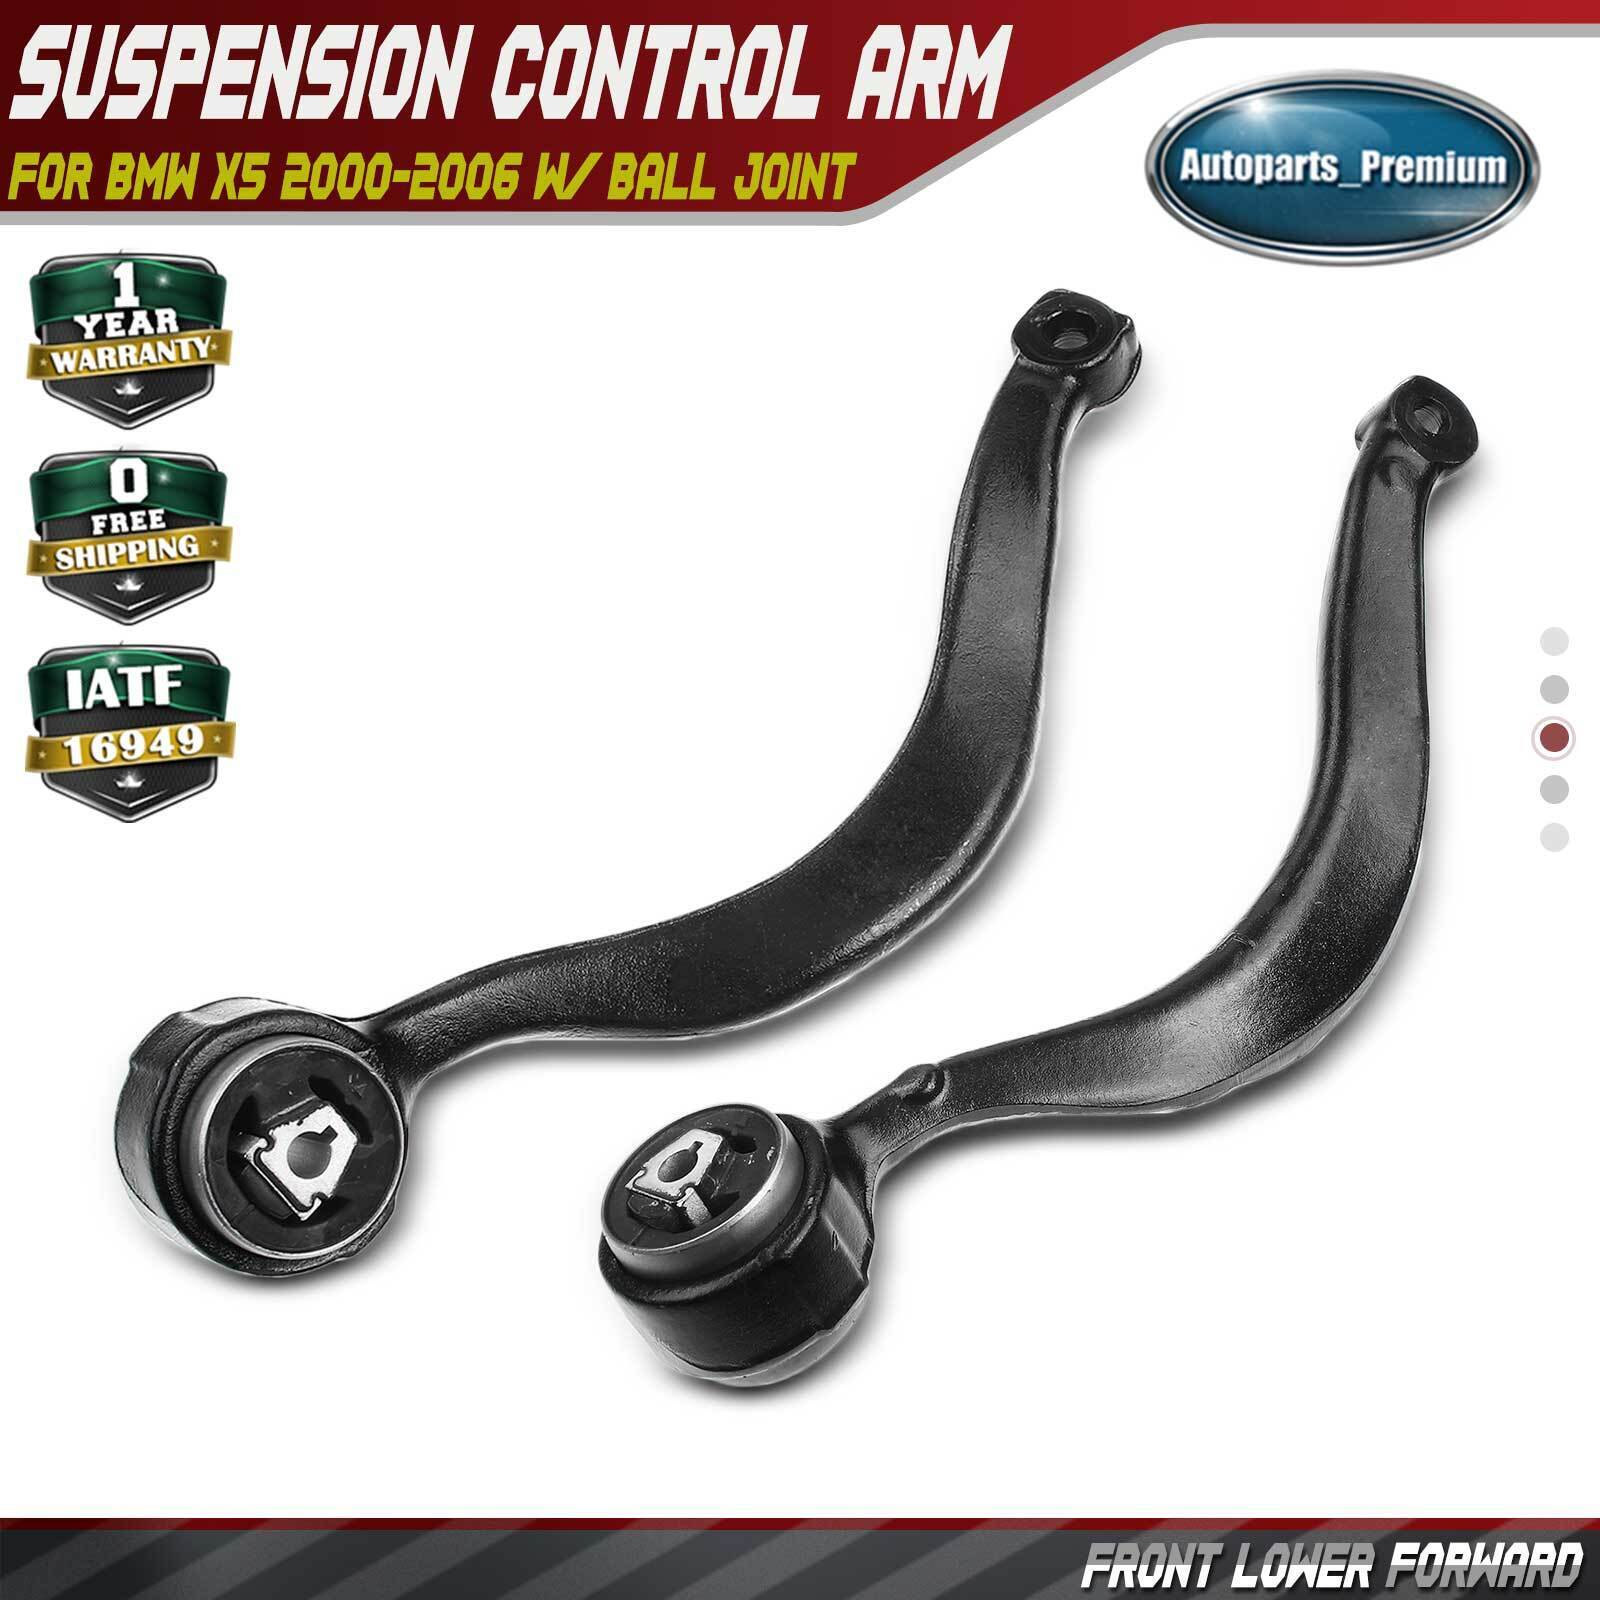 Front Lower Forward Suspension Control Arm for BMW X5 2000 2003 2004 2005 2006